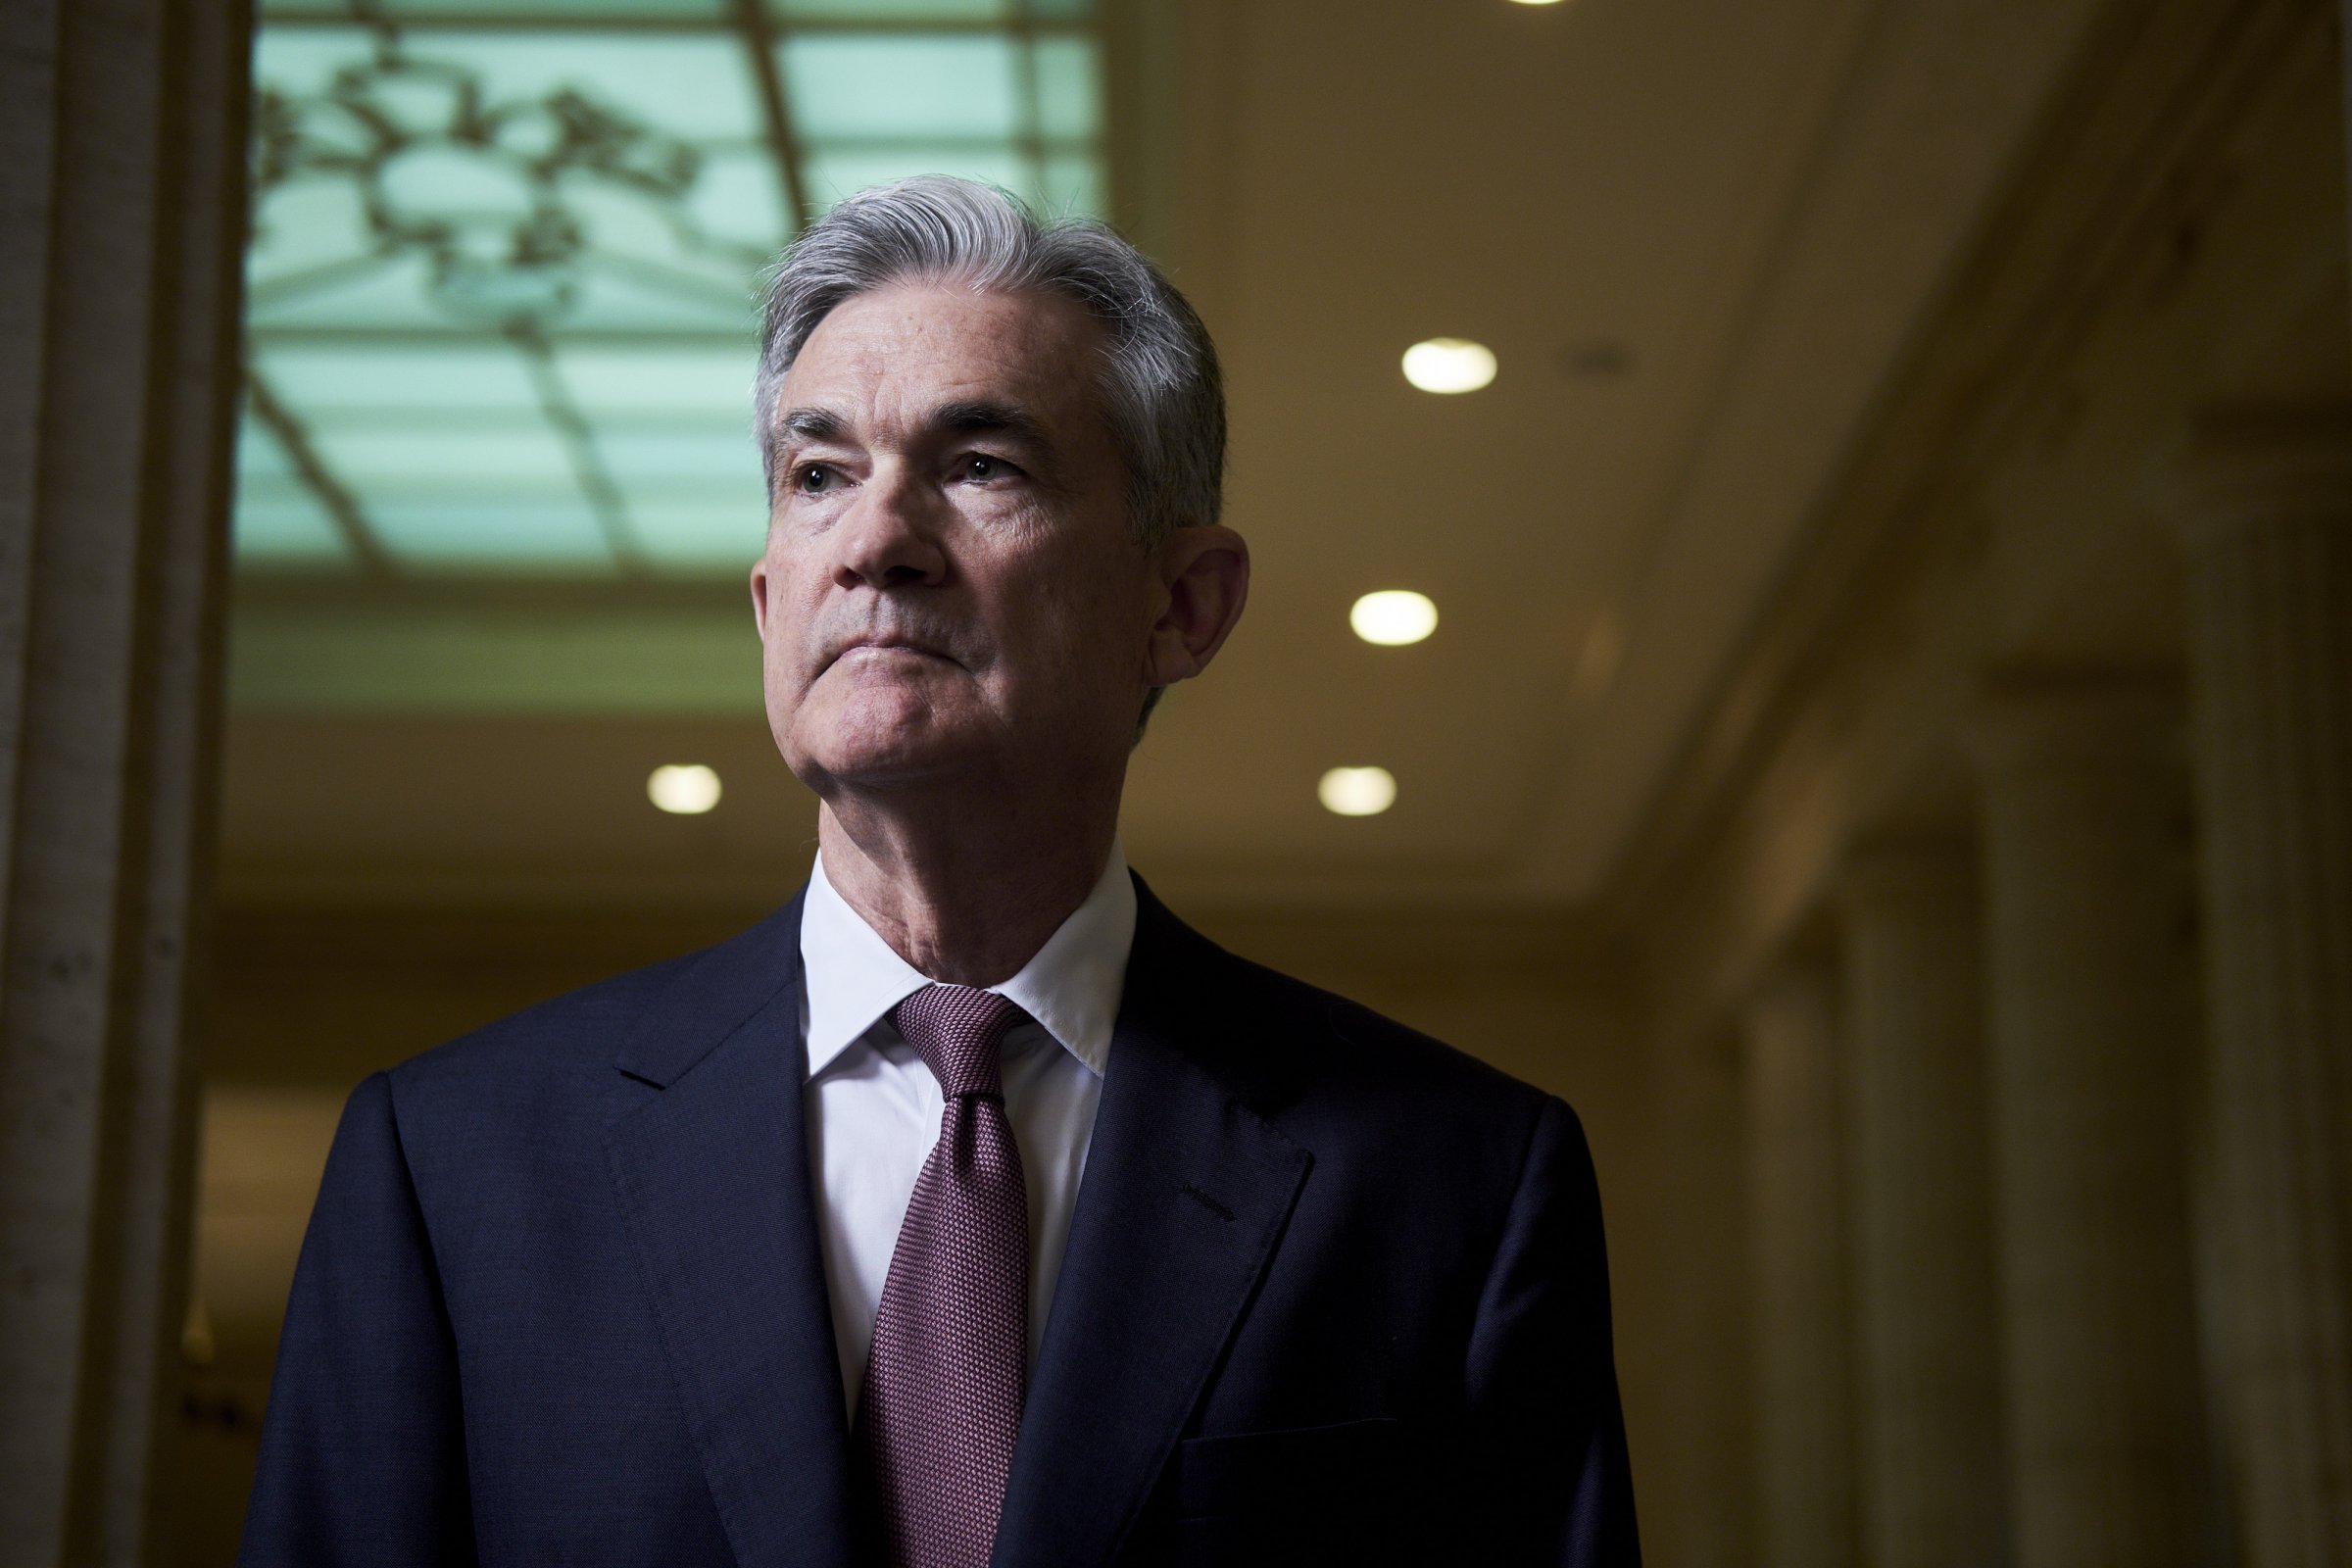 Jay Powell, governor of the U.S. Federal Reserve, stands for a photograph at the board's headquarters in Washington, D.C.